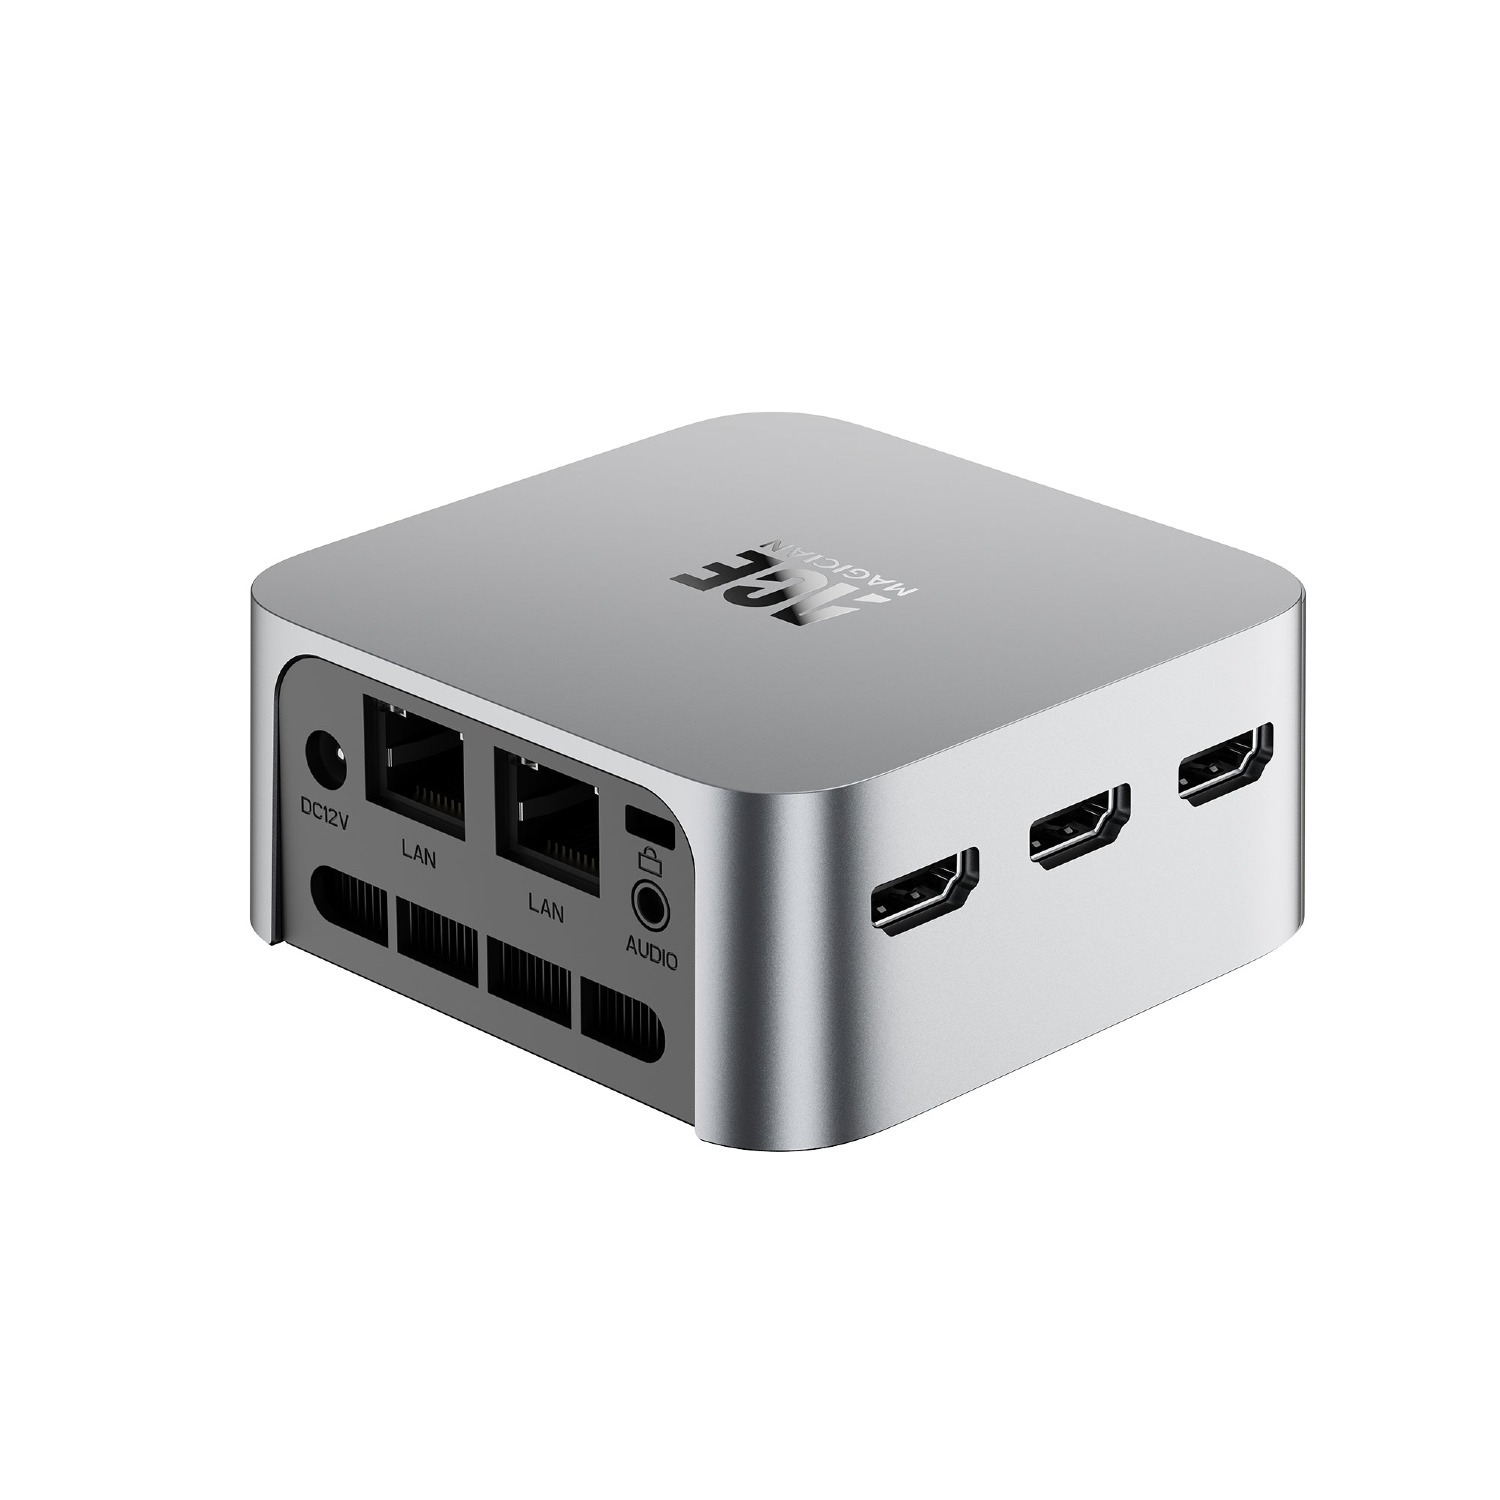  ACEMAGICIAN Mini PC Intel 12th N95 (up to 3.4GHz) 16GB